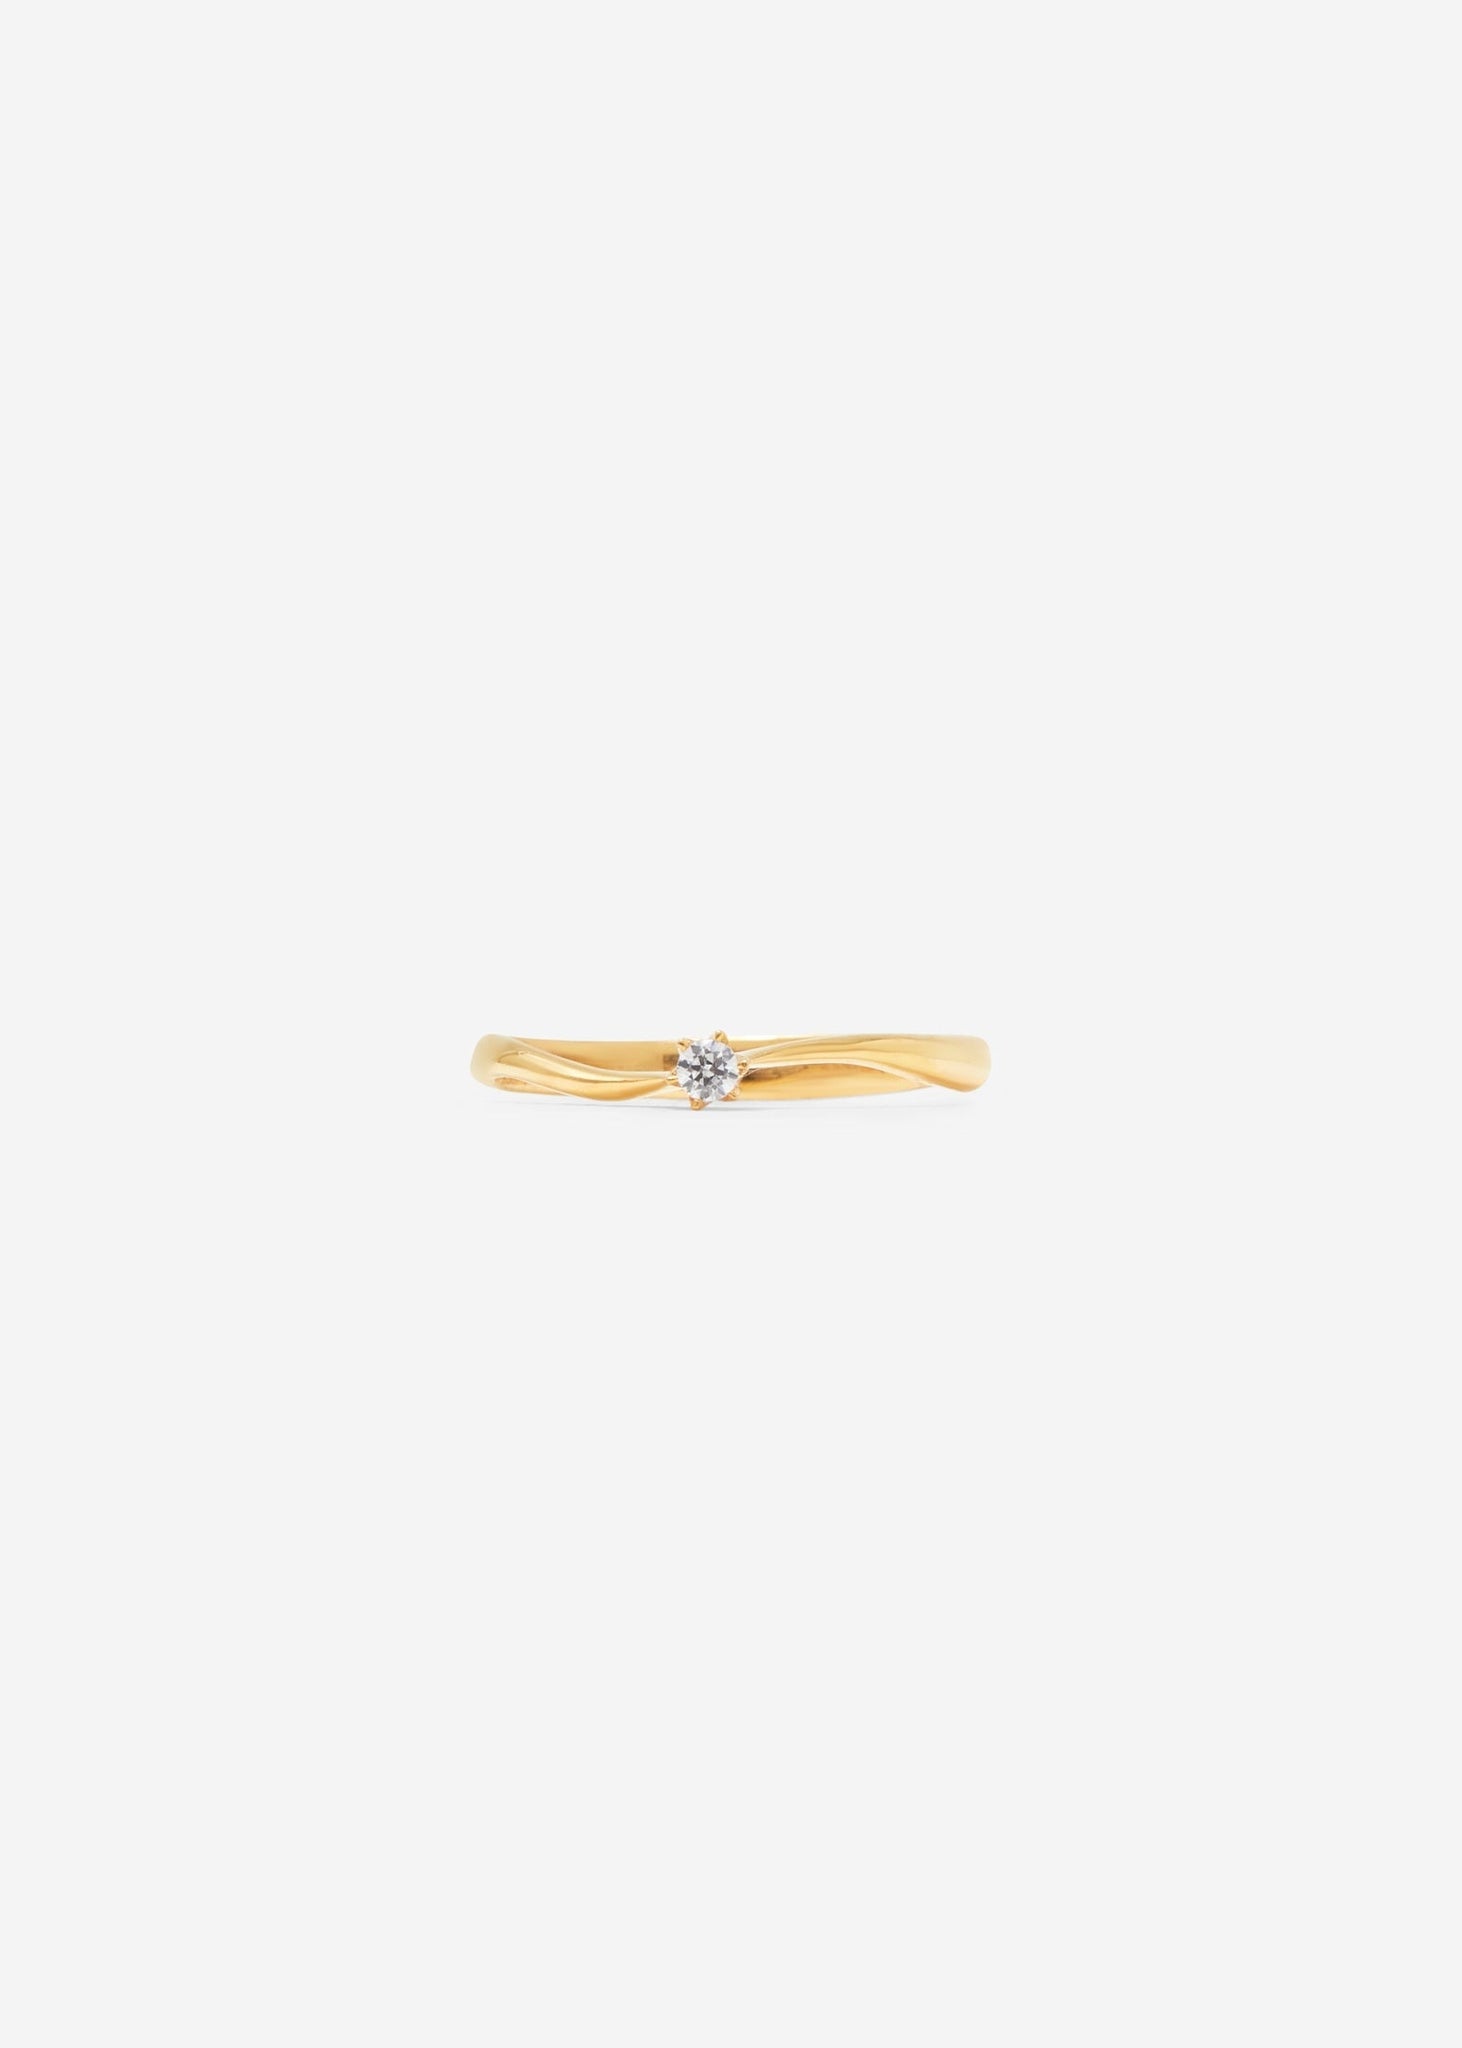 Molded Brilliant Cut Solitaire Ring Mini 0.05 - 0.1 Ct - Rings - Customised - 1